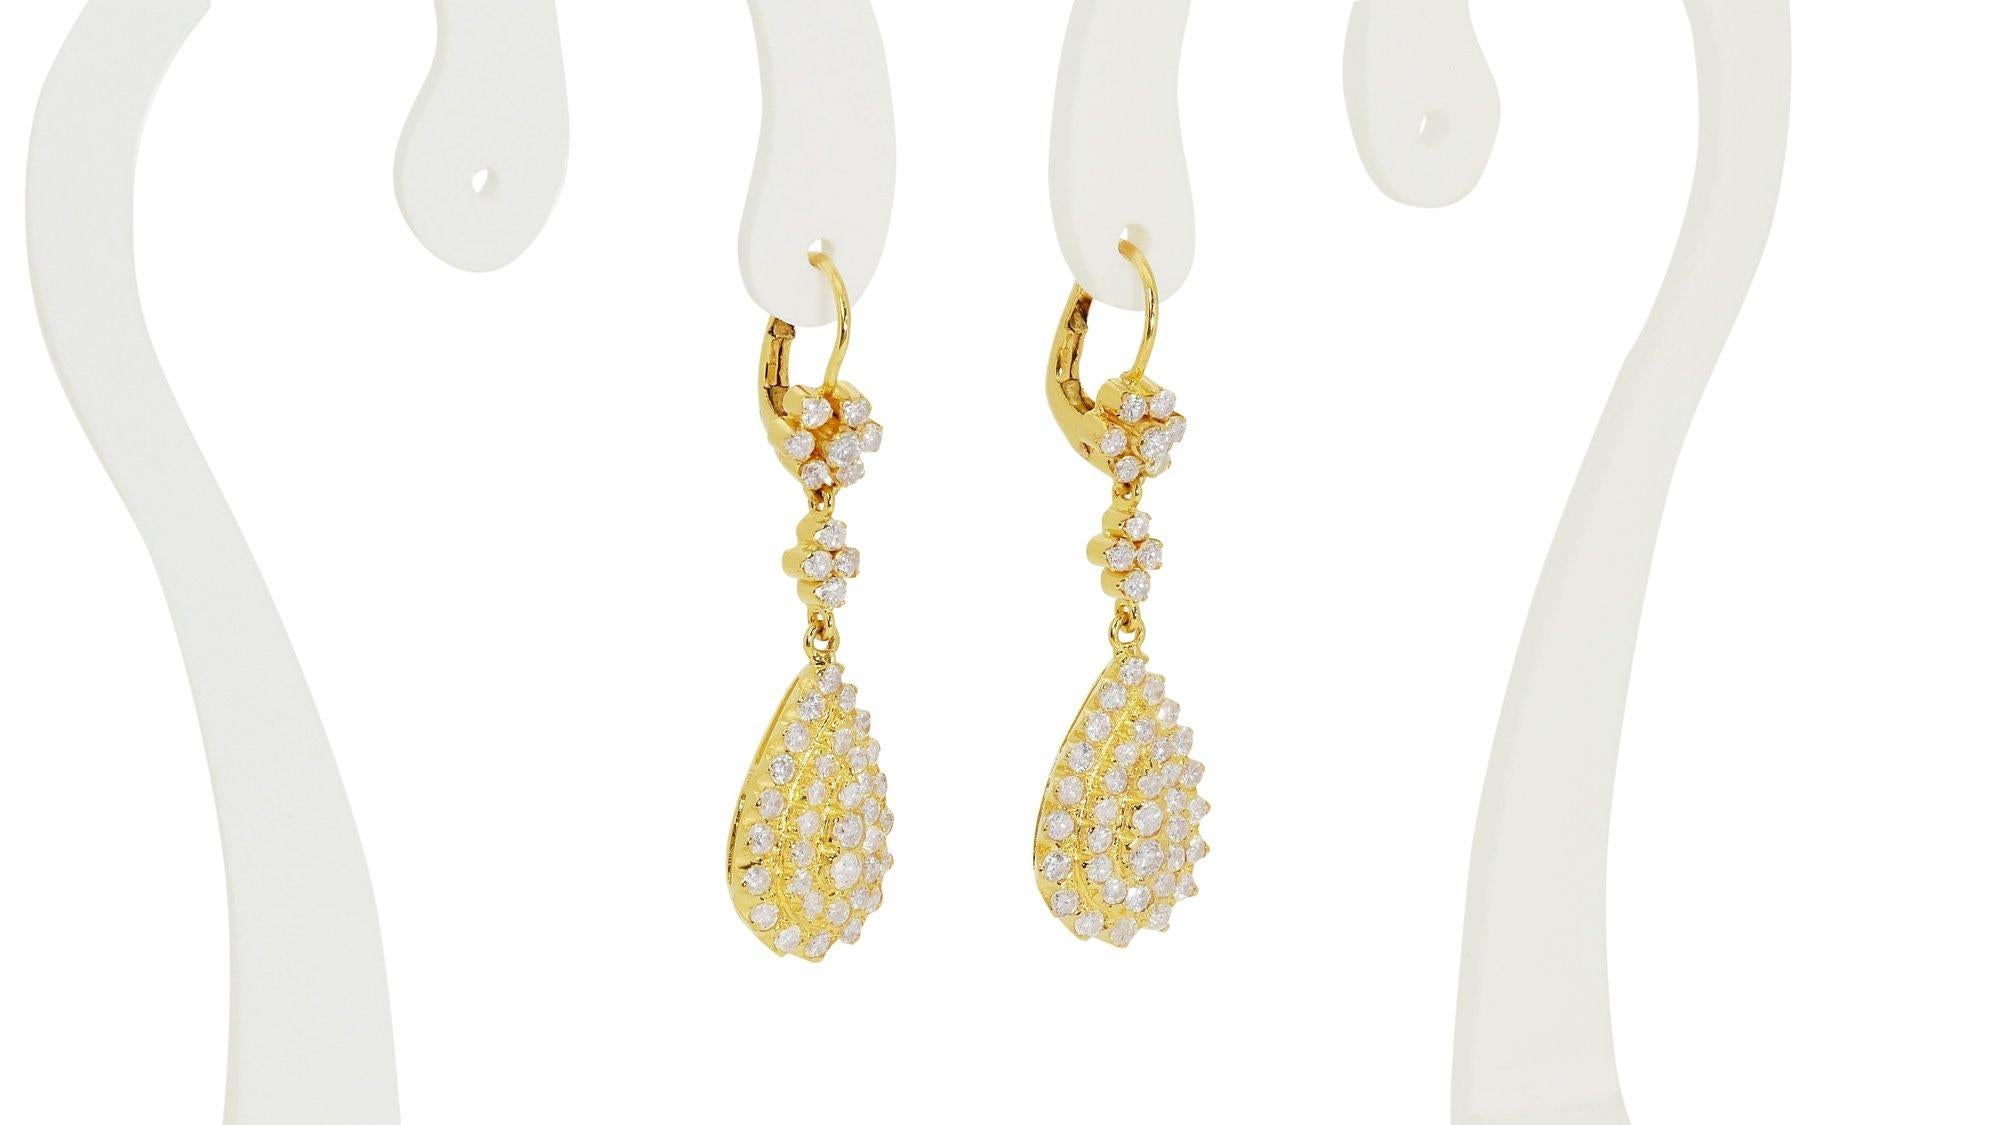 Marvelous 18k Yellow Gold Drop Earrings w/ 2ct Natural Diamonds IGI Certificate In New Condition For Sale In רמת גן, IL